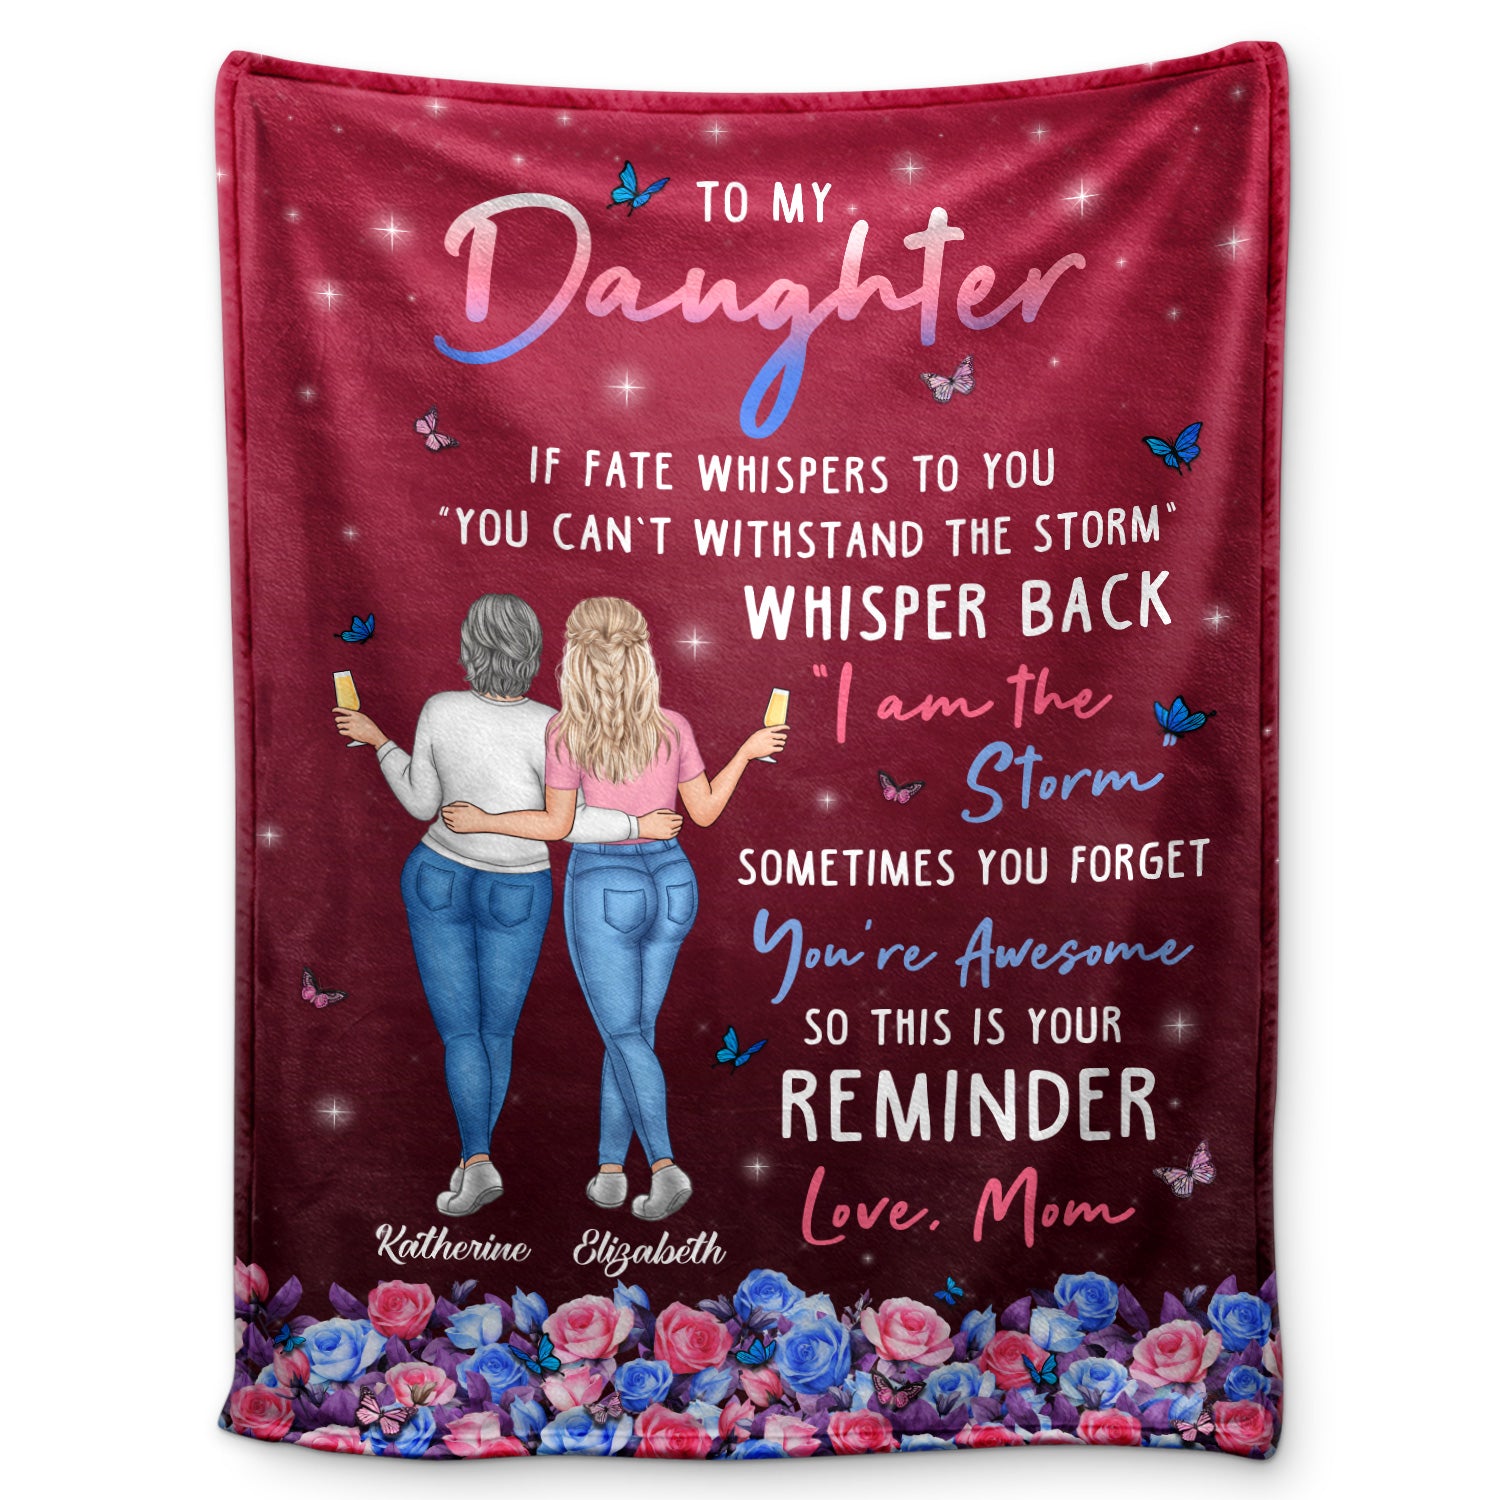 Whisper Back I Am The Storm - Gift For Daughter From Mother - Personalized Fleece Blanket, Sherpa Blanket